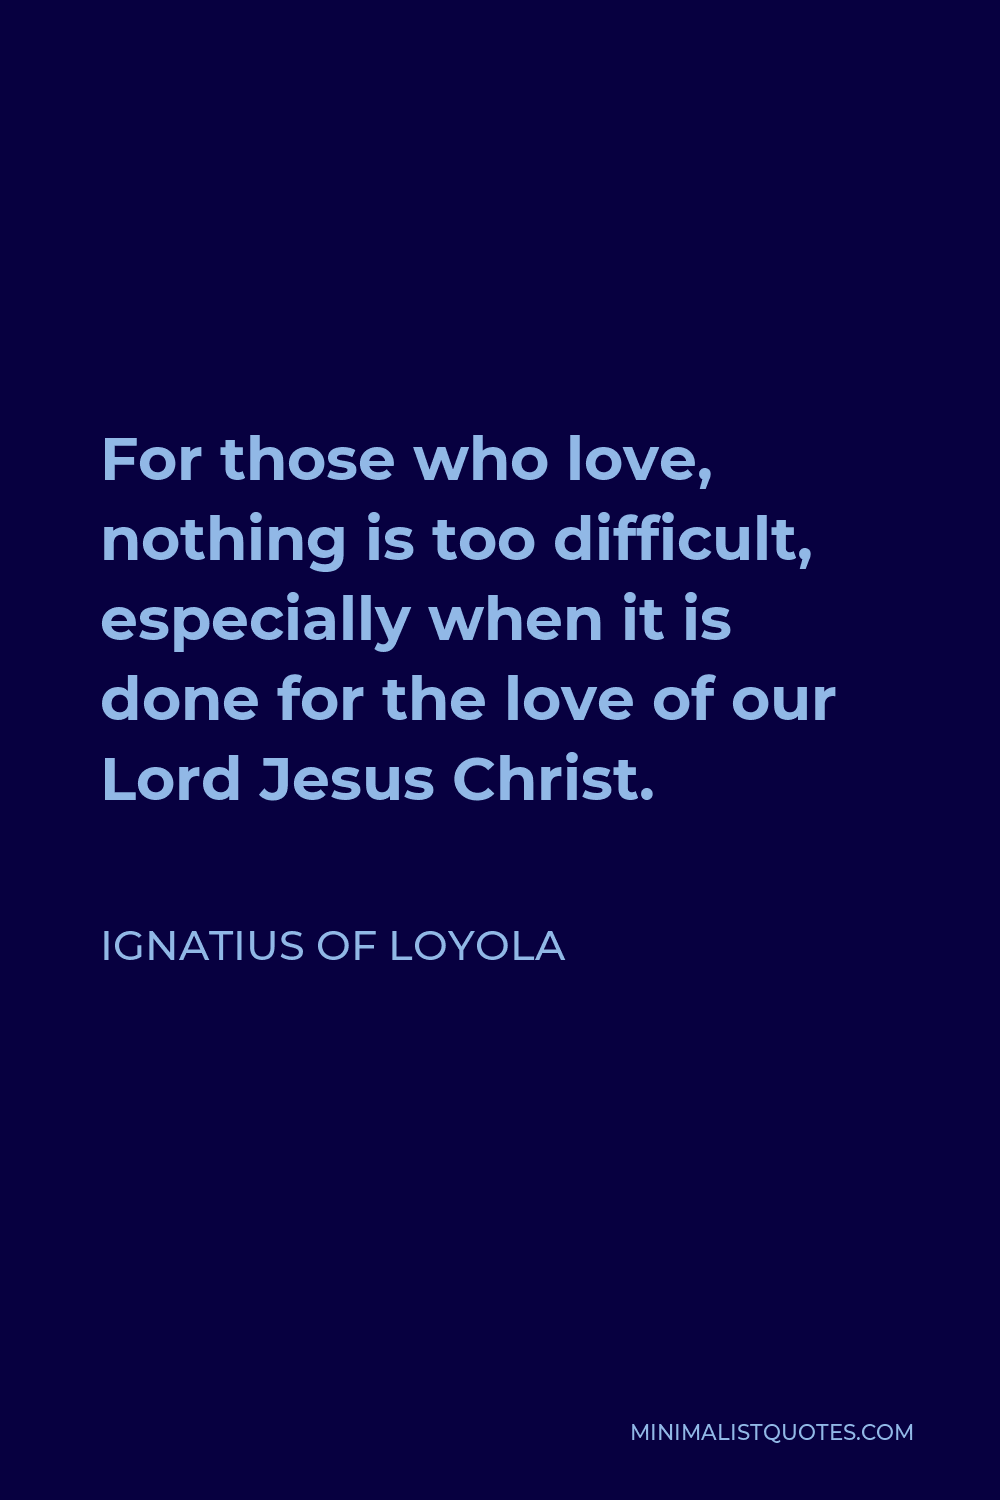 Ignatius of Loyola Quote - For those who love, nothing is too difficult, especially when it is done for the love of our Lord Jesus Christ.